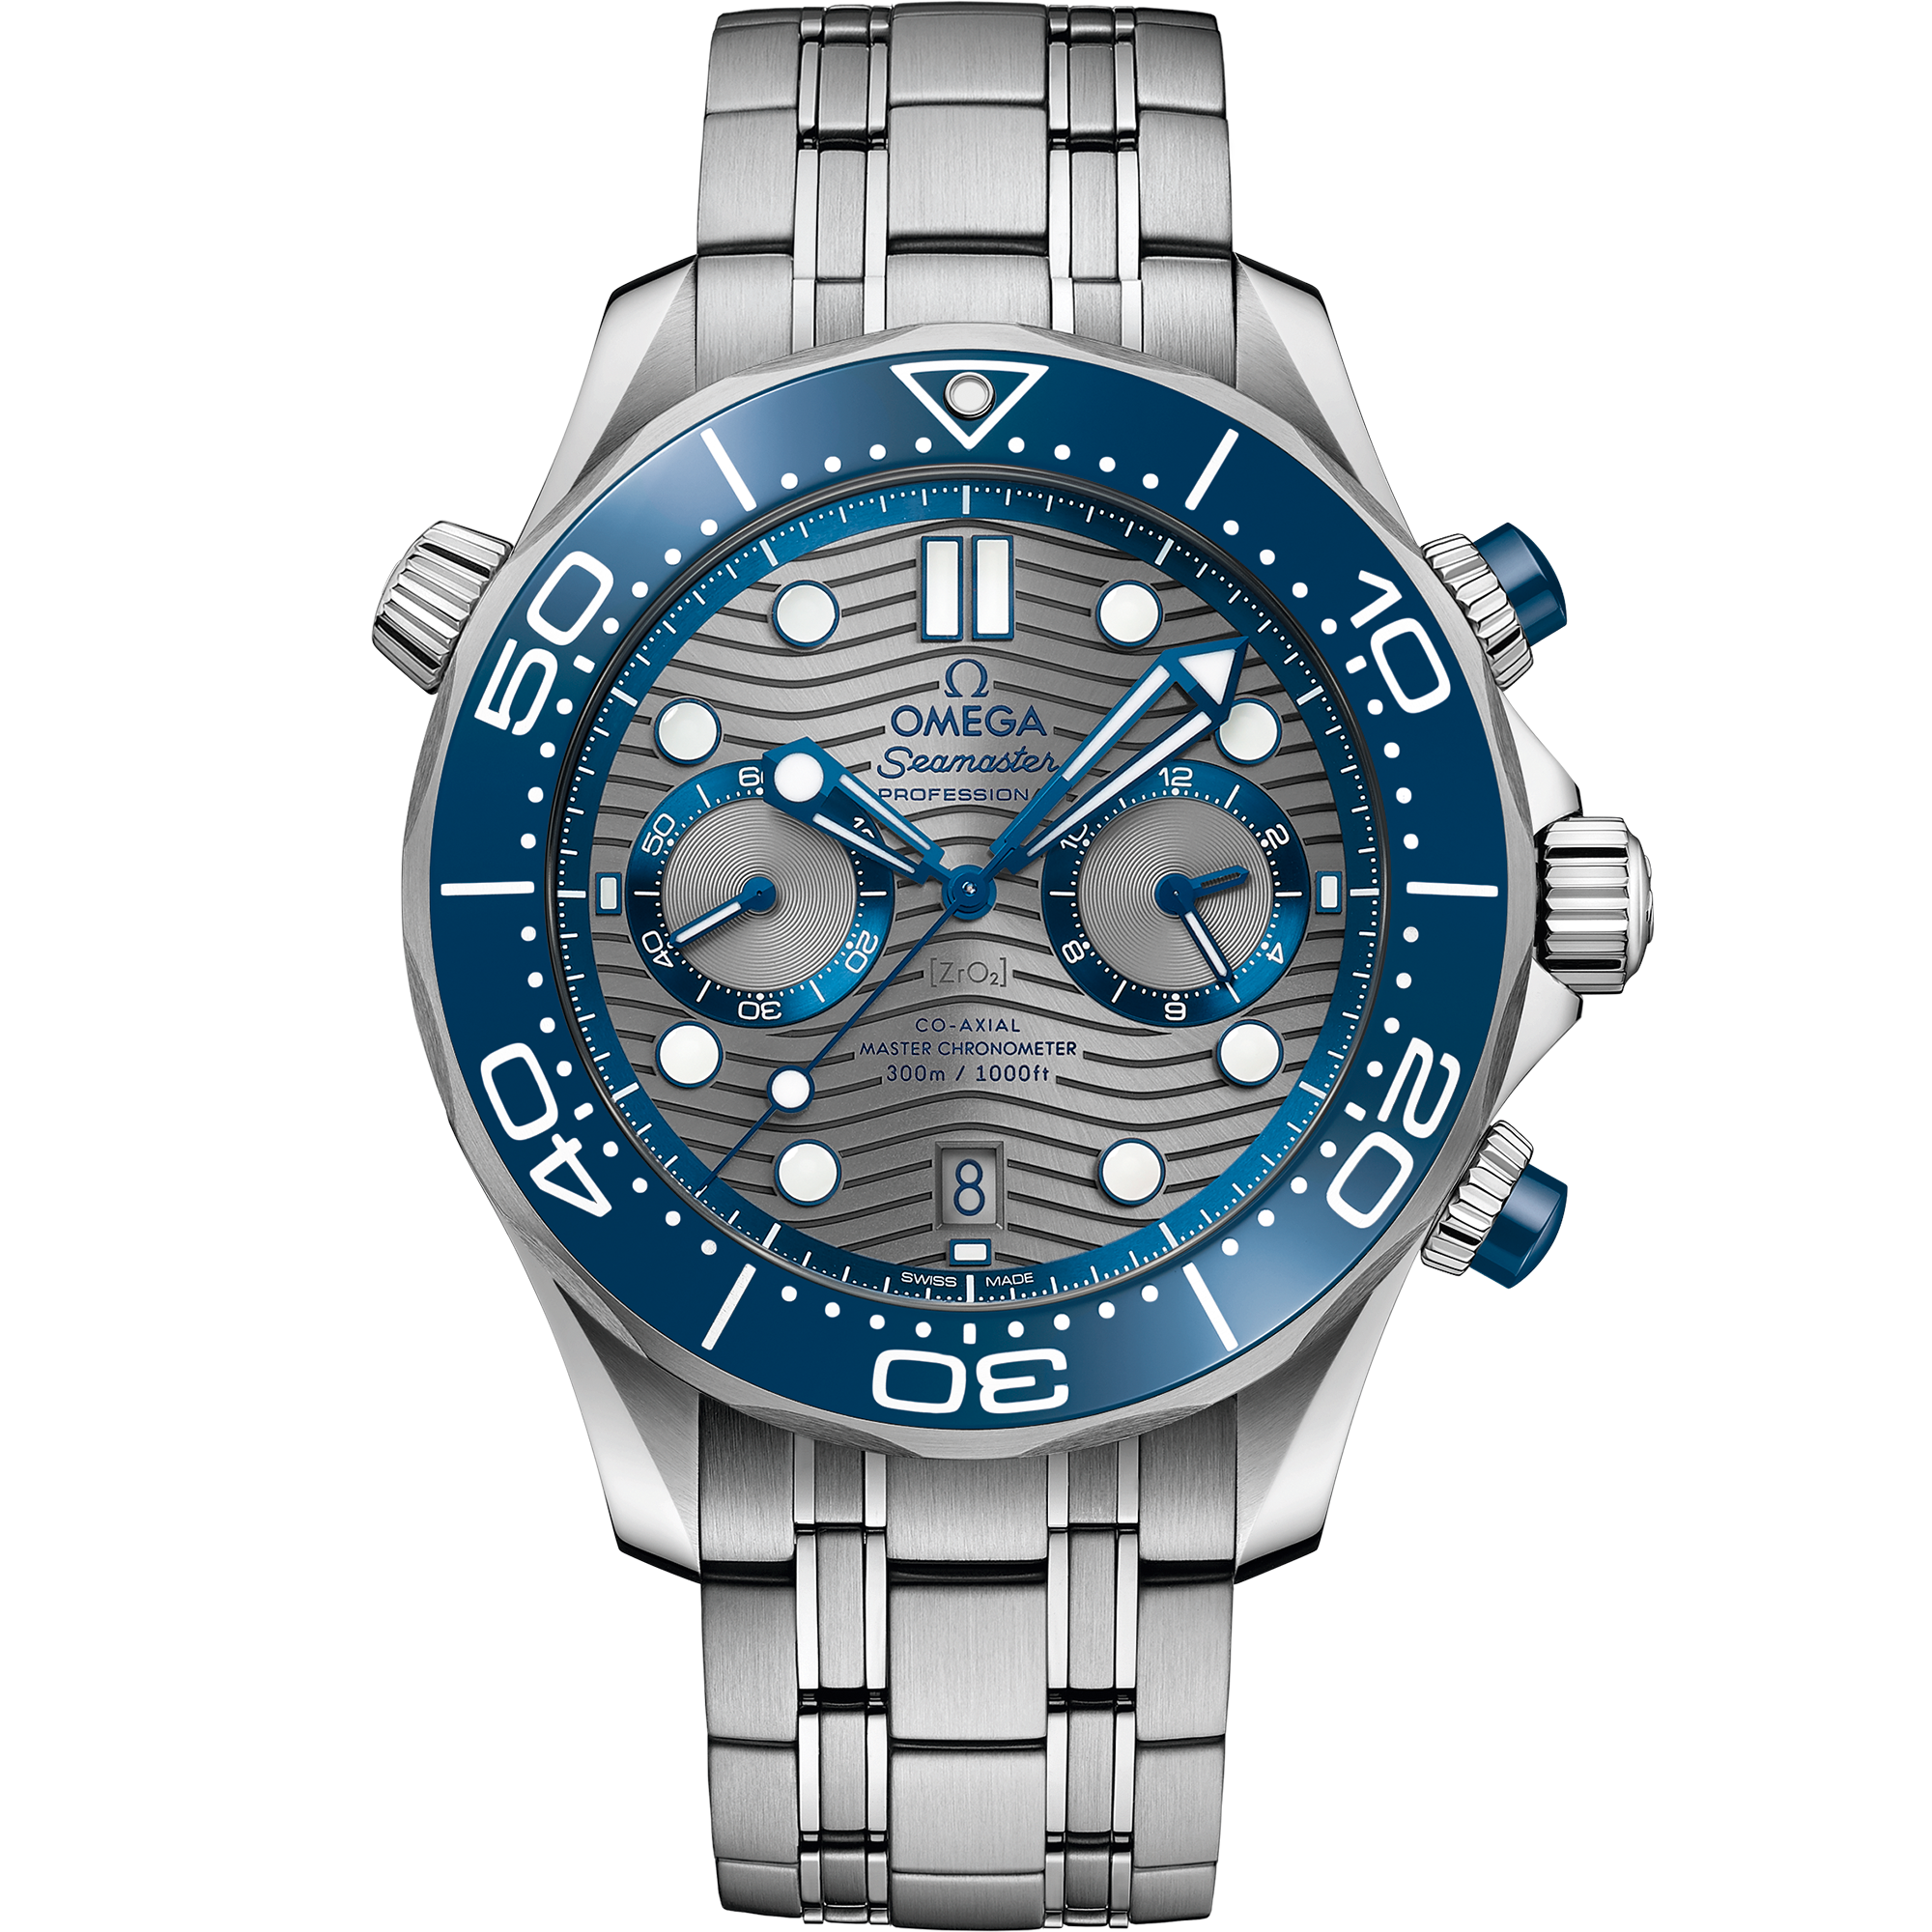 Diver 300M Seamaster Steel Chronograph Watch 210.30.44.51.01.001 | OMEGA US®